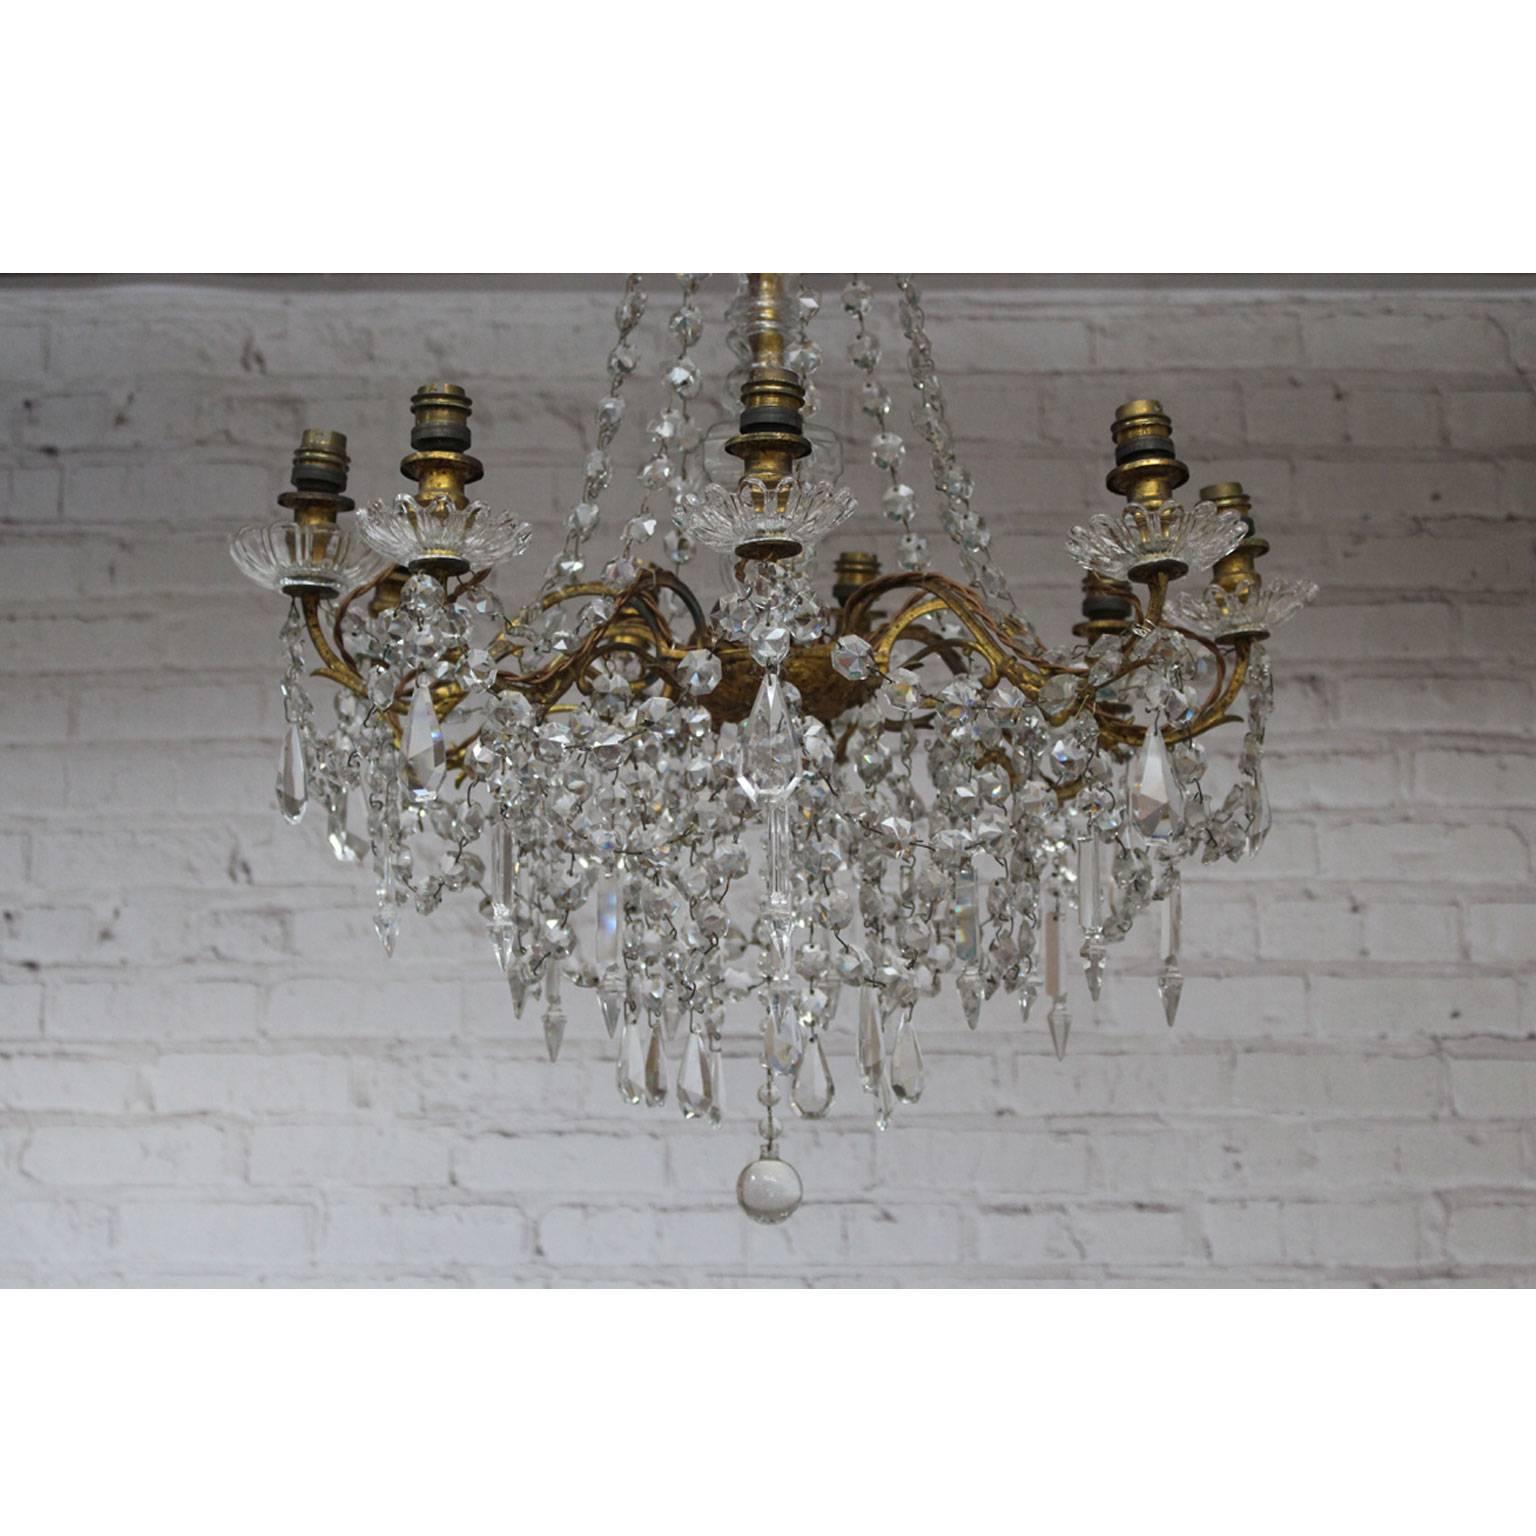 Beautiful and decorative, understated yet ornate, this wonderful chandelier would look fabulous in pretty much any setting. Why not mix it with contemporary furniture? This light even has it's original glass central decoration. Decorated with